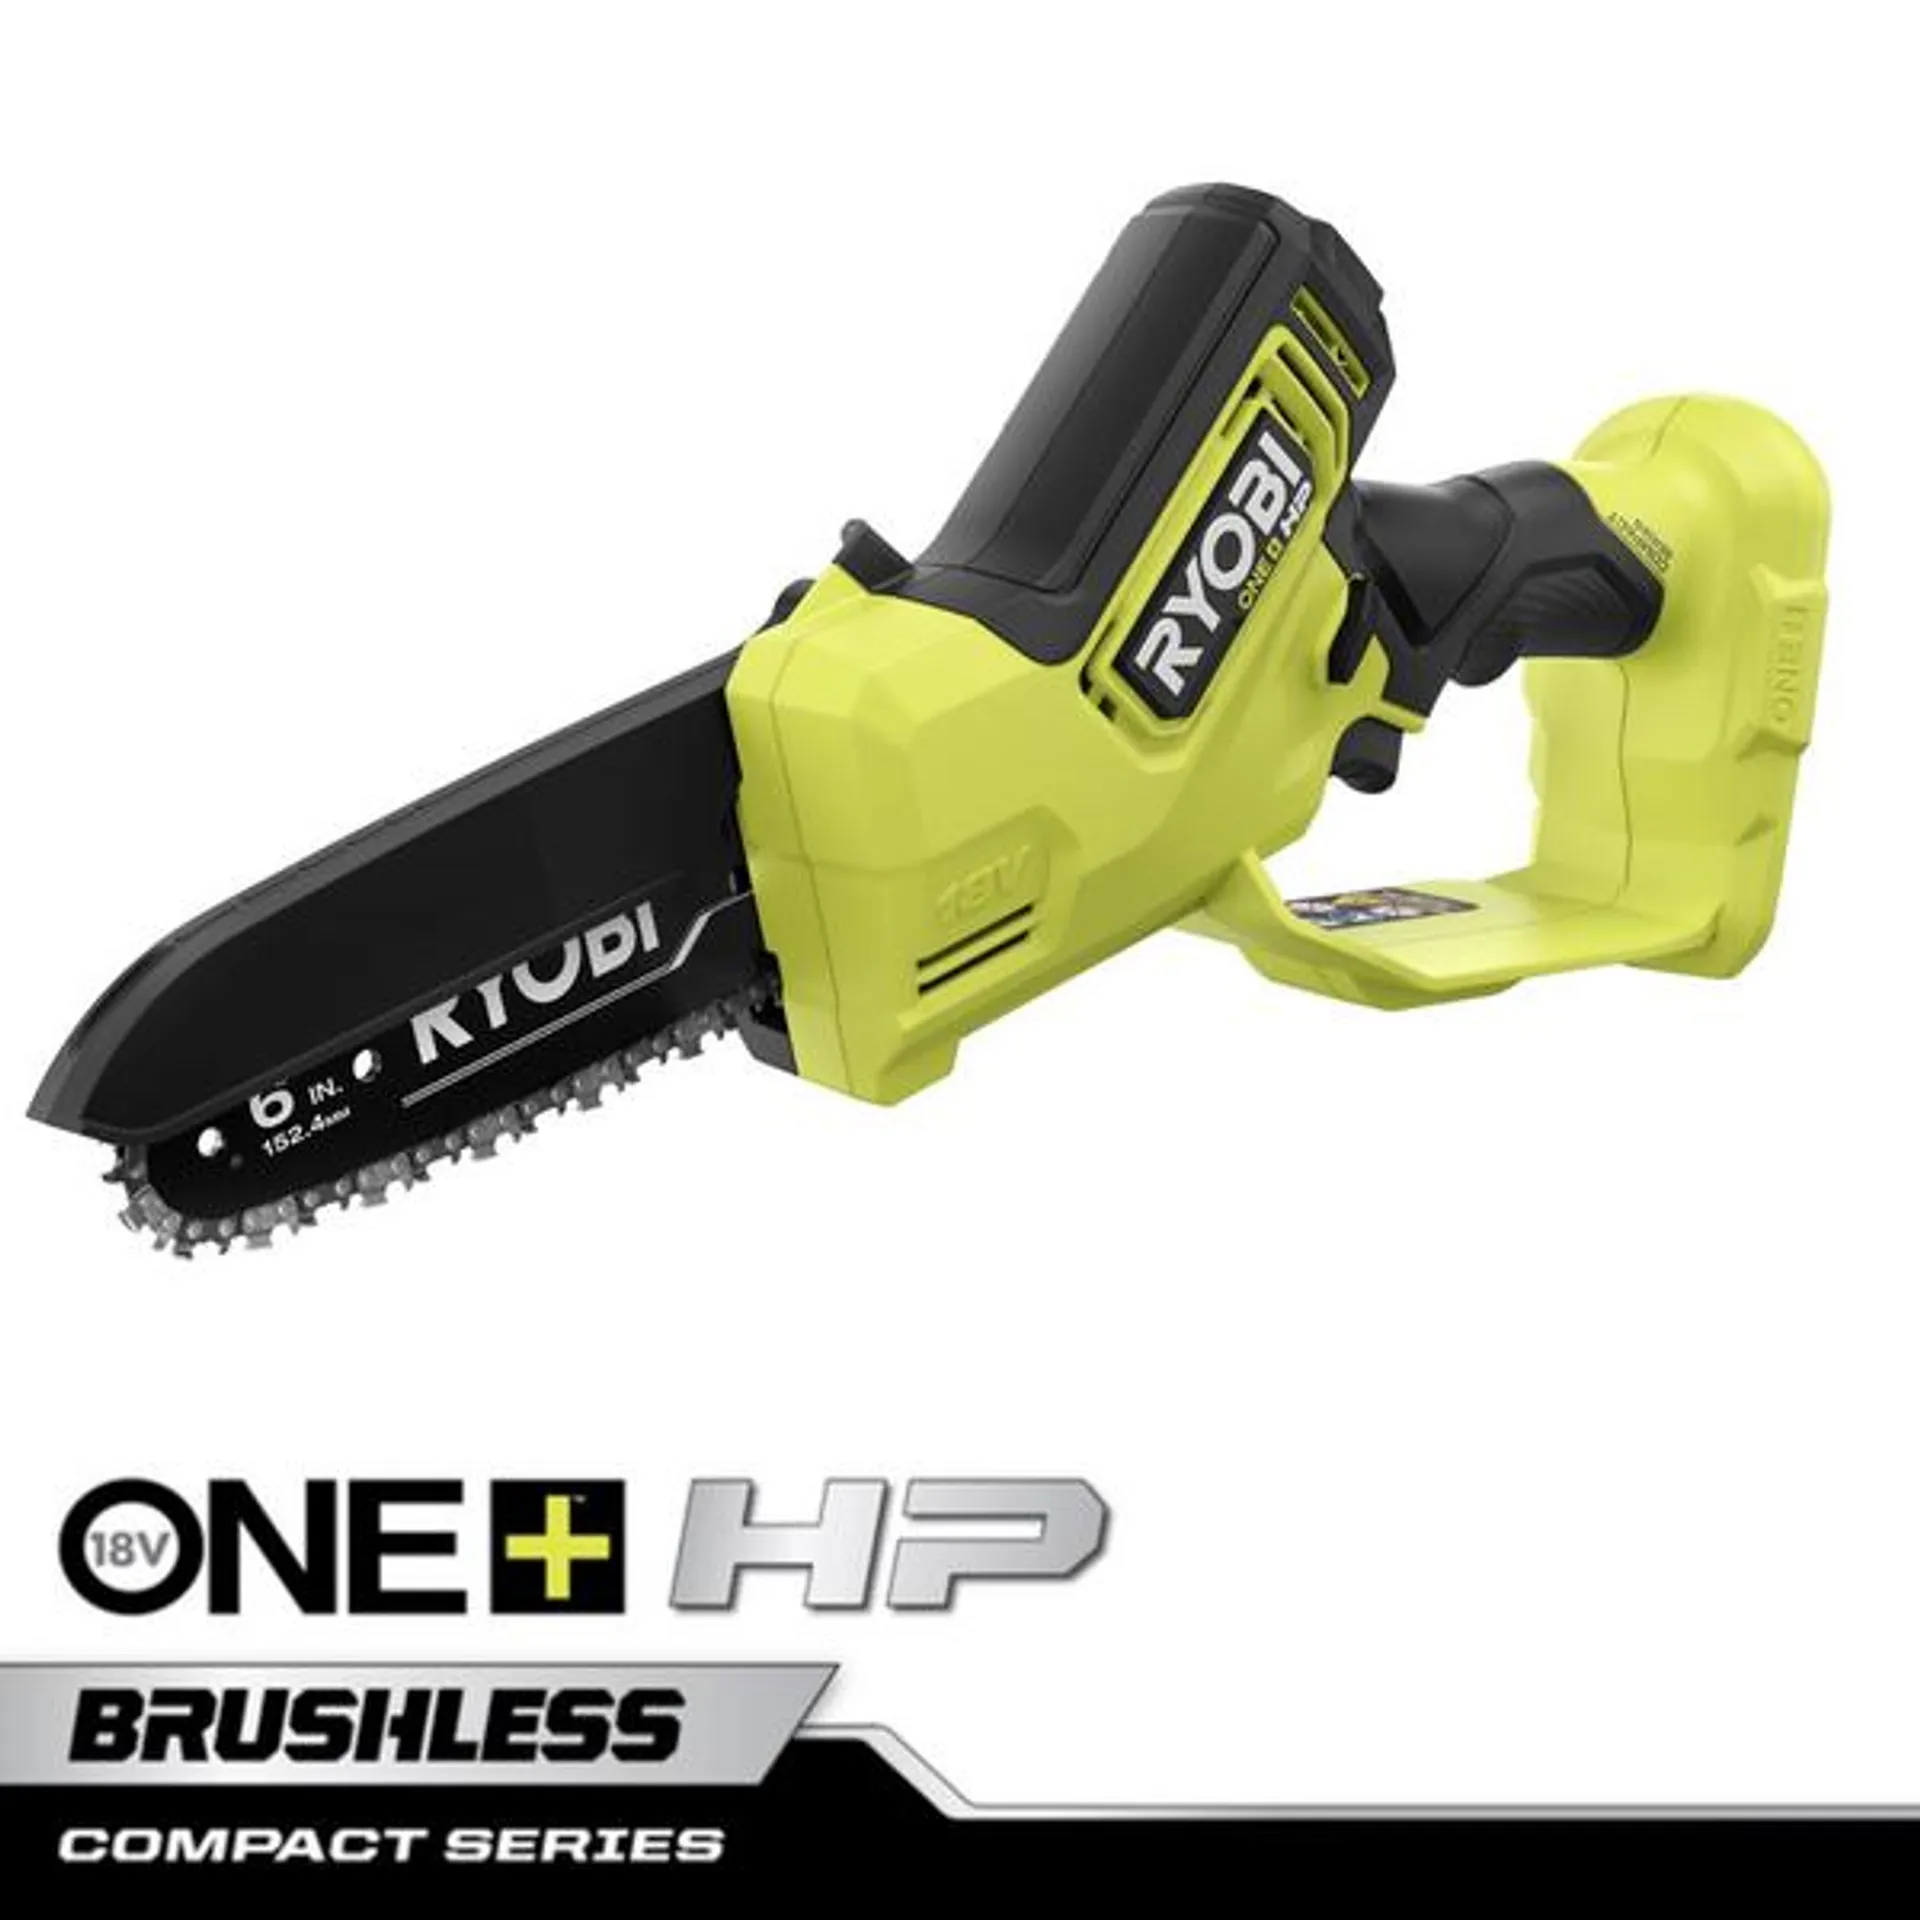 18V ONE+ HP 6" COMPACT BRUSHLESS PRUNING CHAINSAW